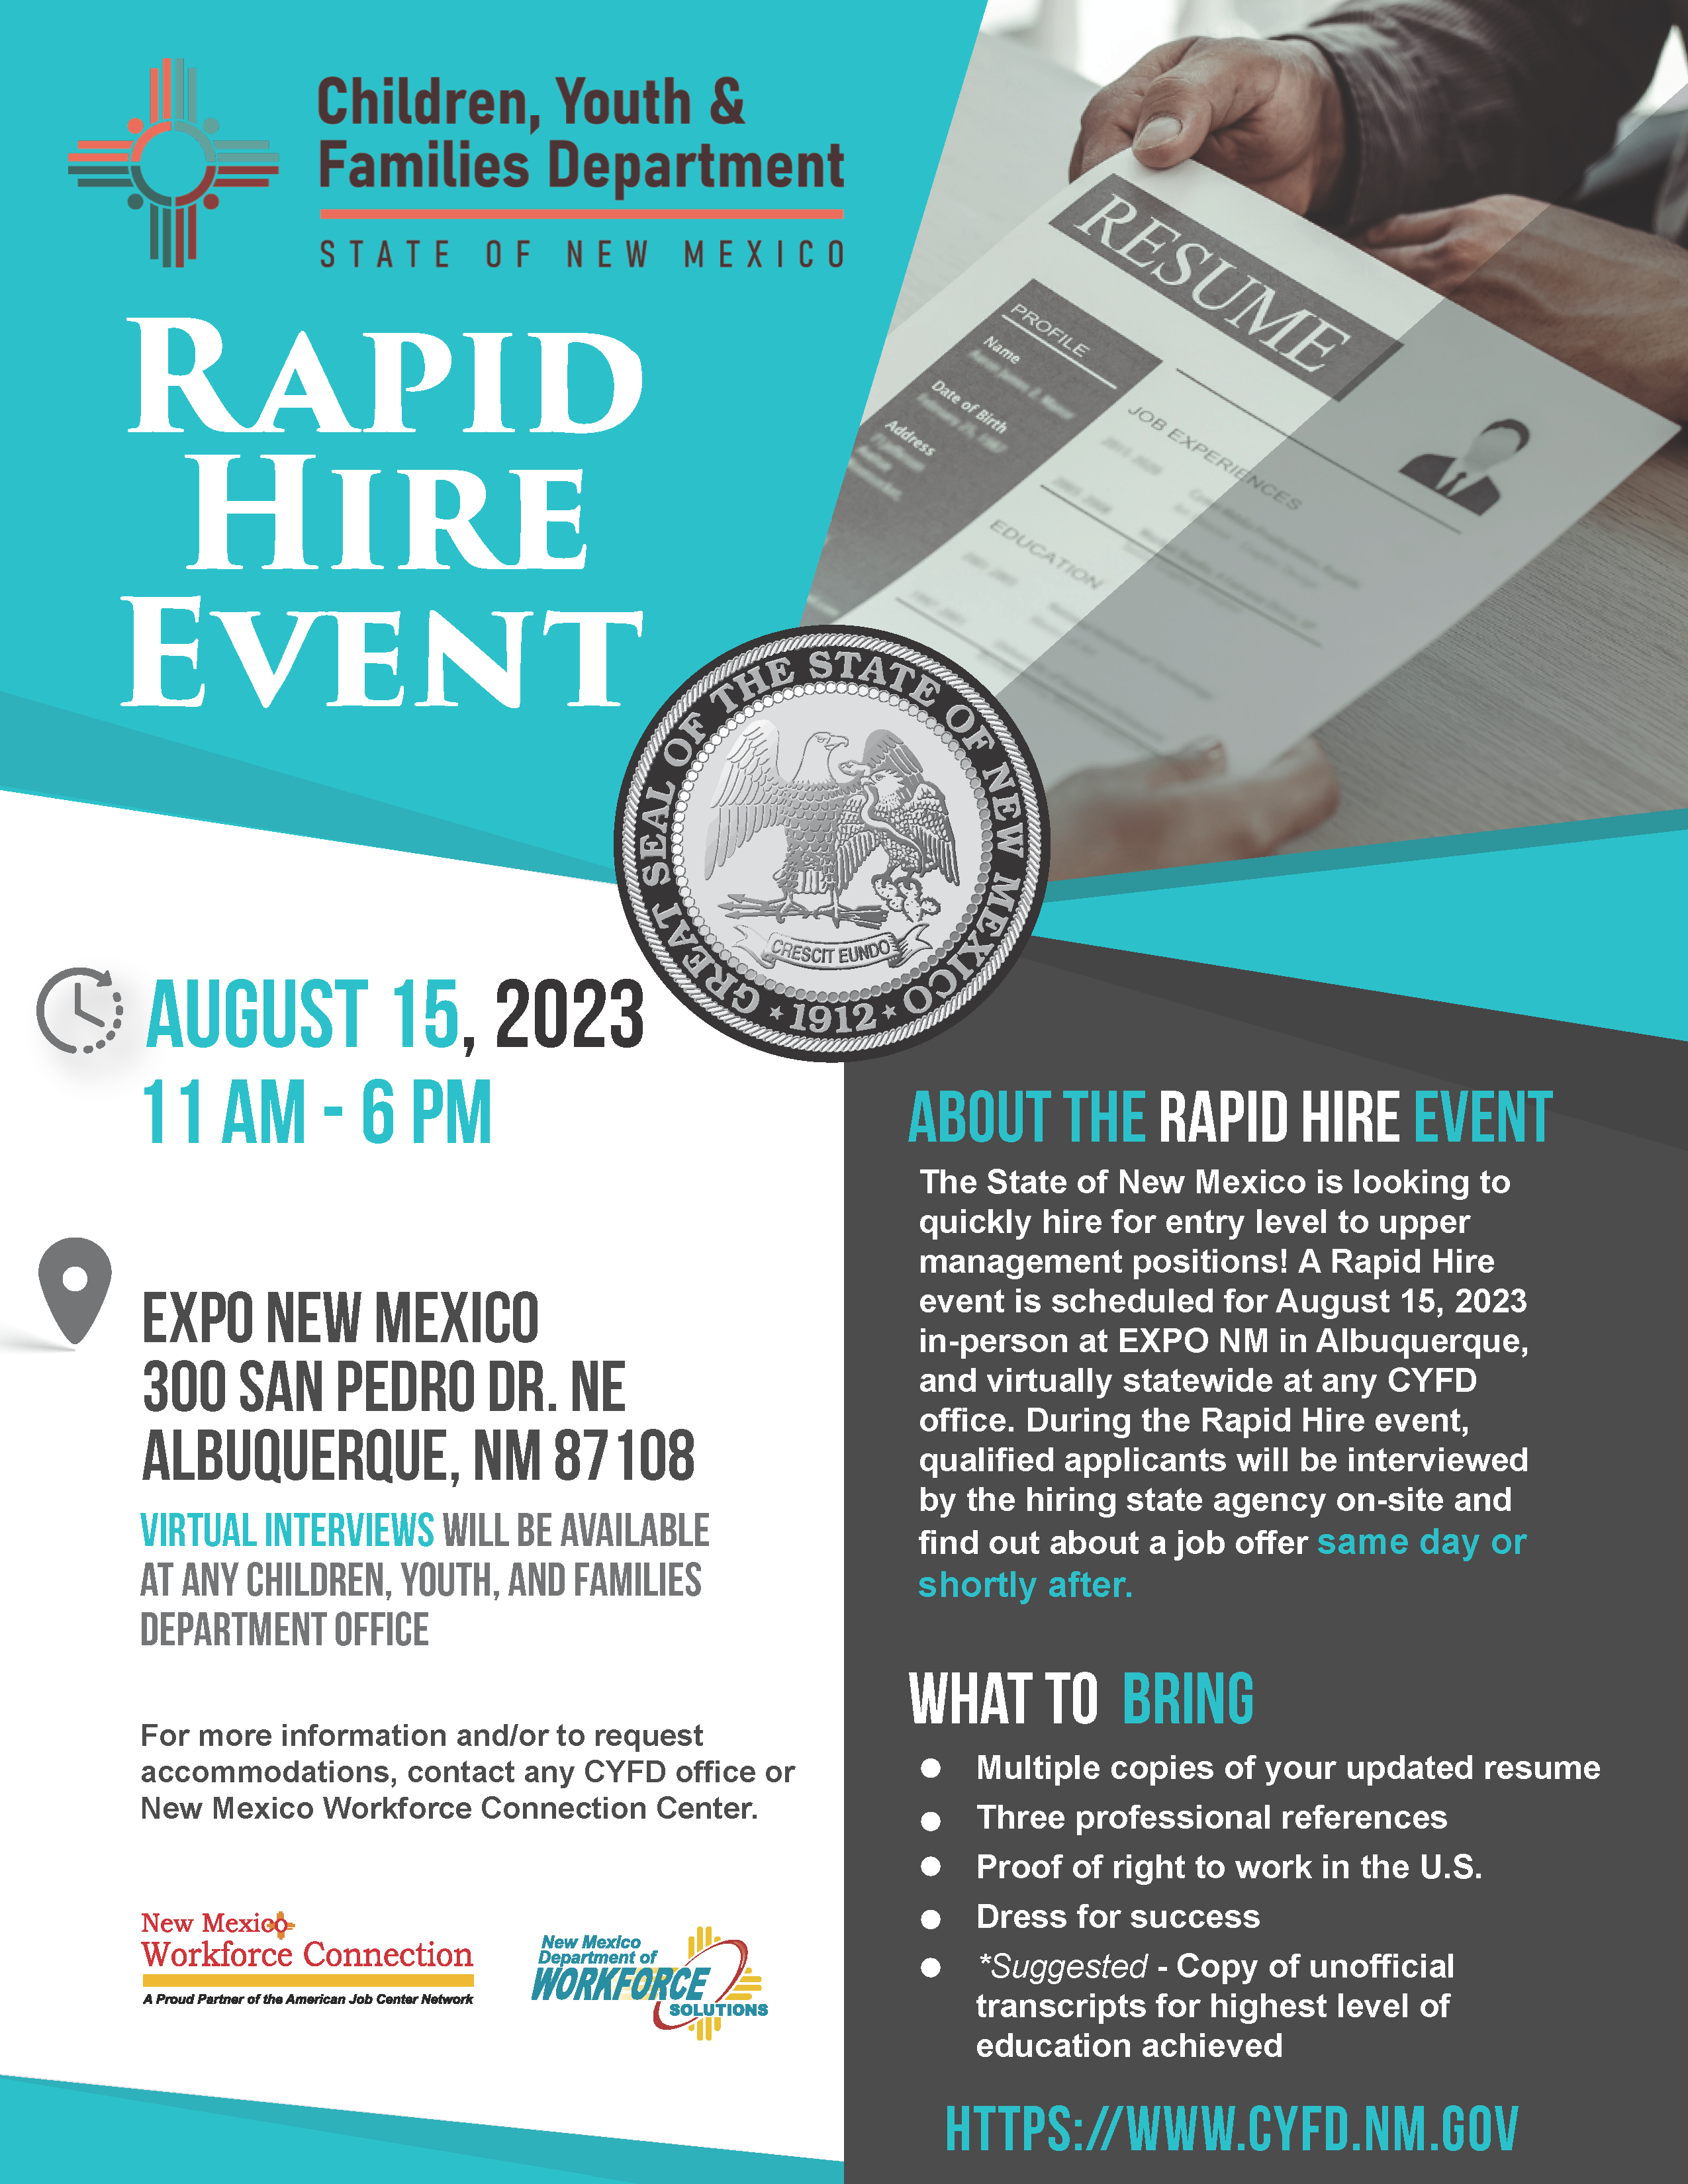 Rapid Hire Event CYFD flyer